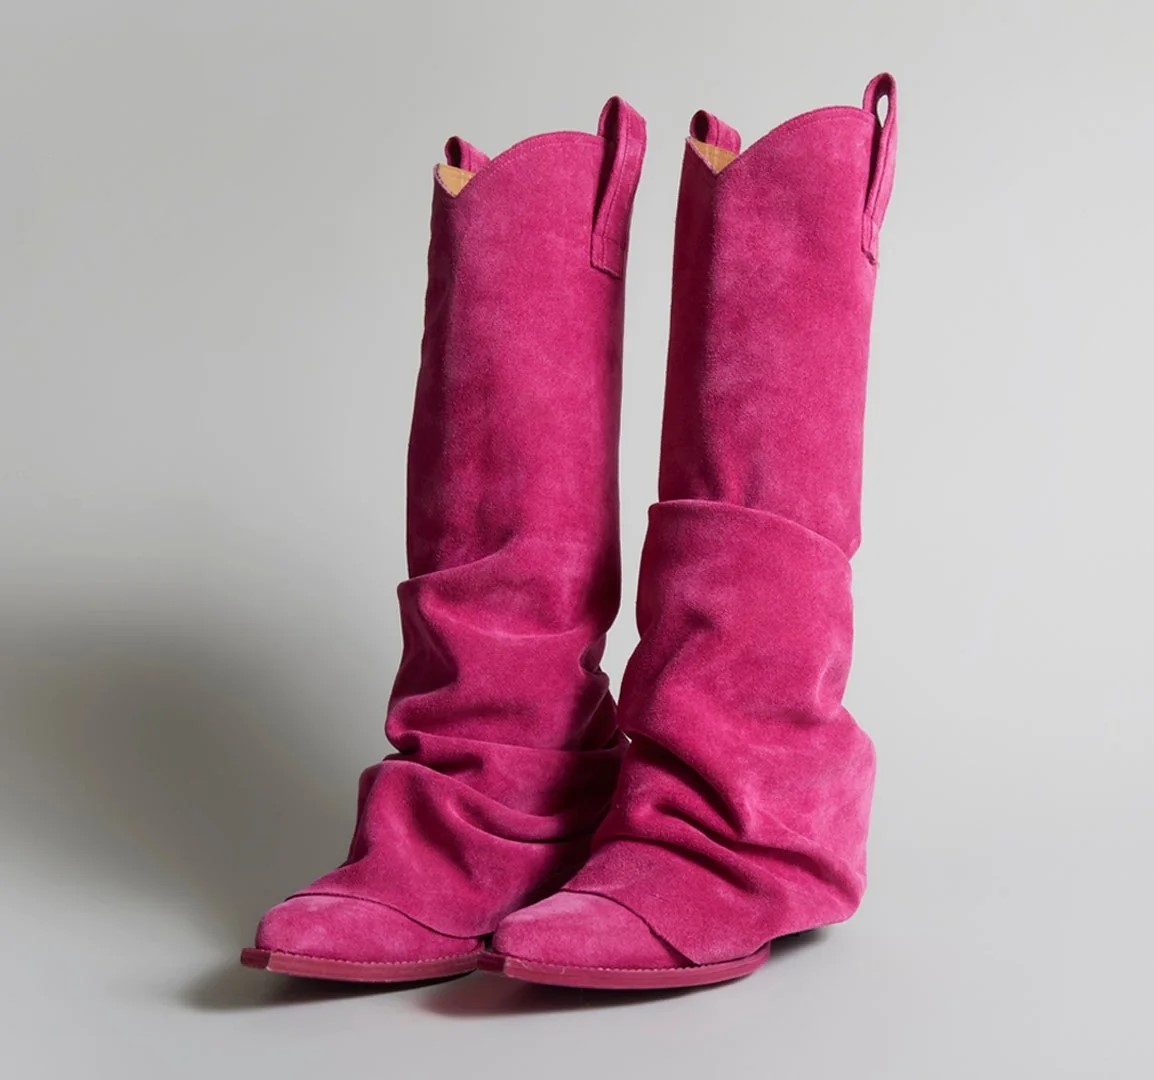 5932mpid-cowboy-boots-pink-suede-145769.jpg